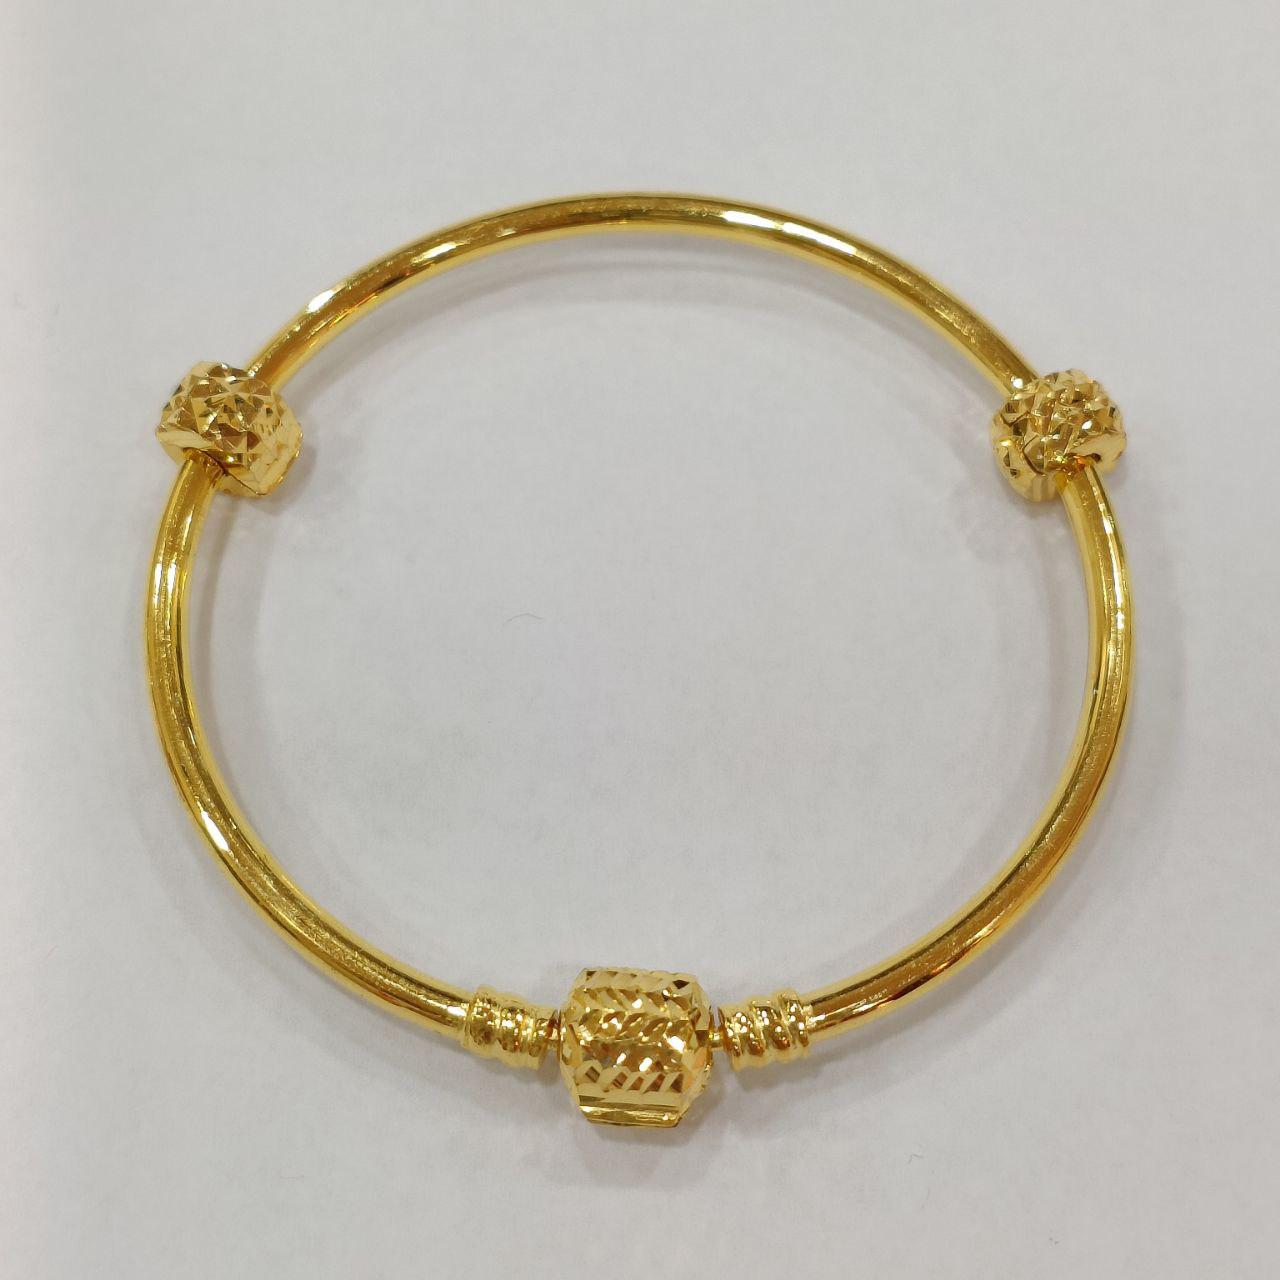 22K / 916 Gold Oval Lock Charm Bangle with stopper-916 gold-Best Gold Shop